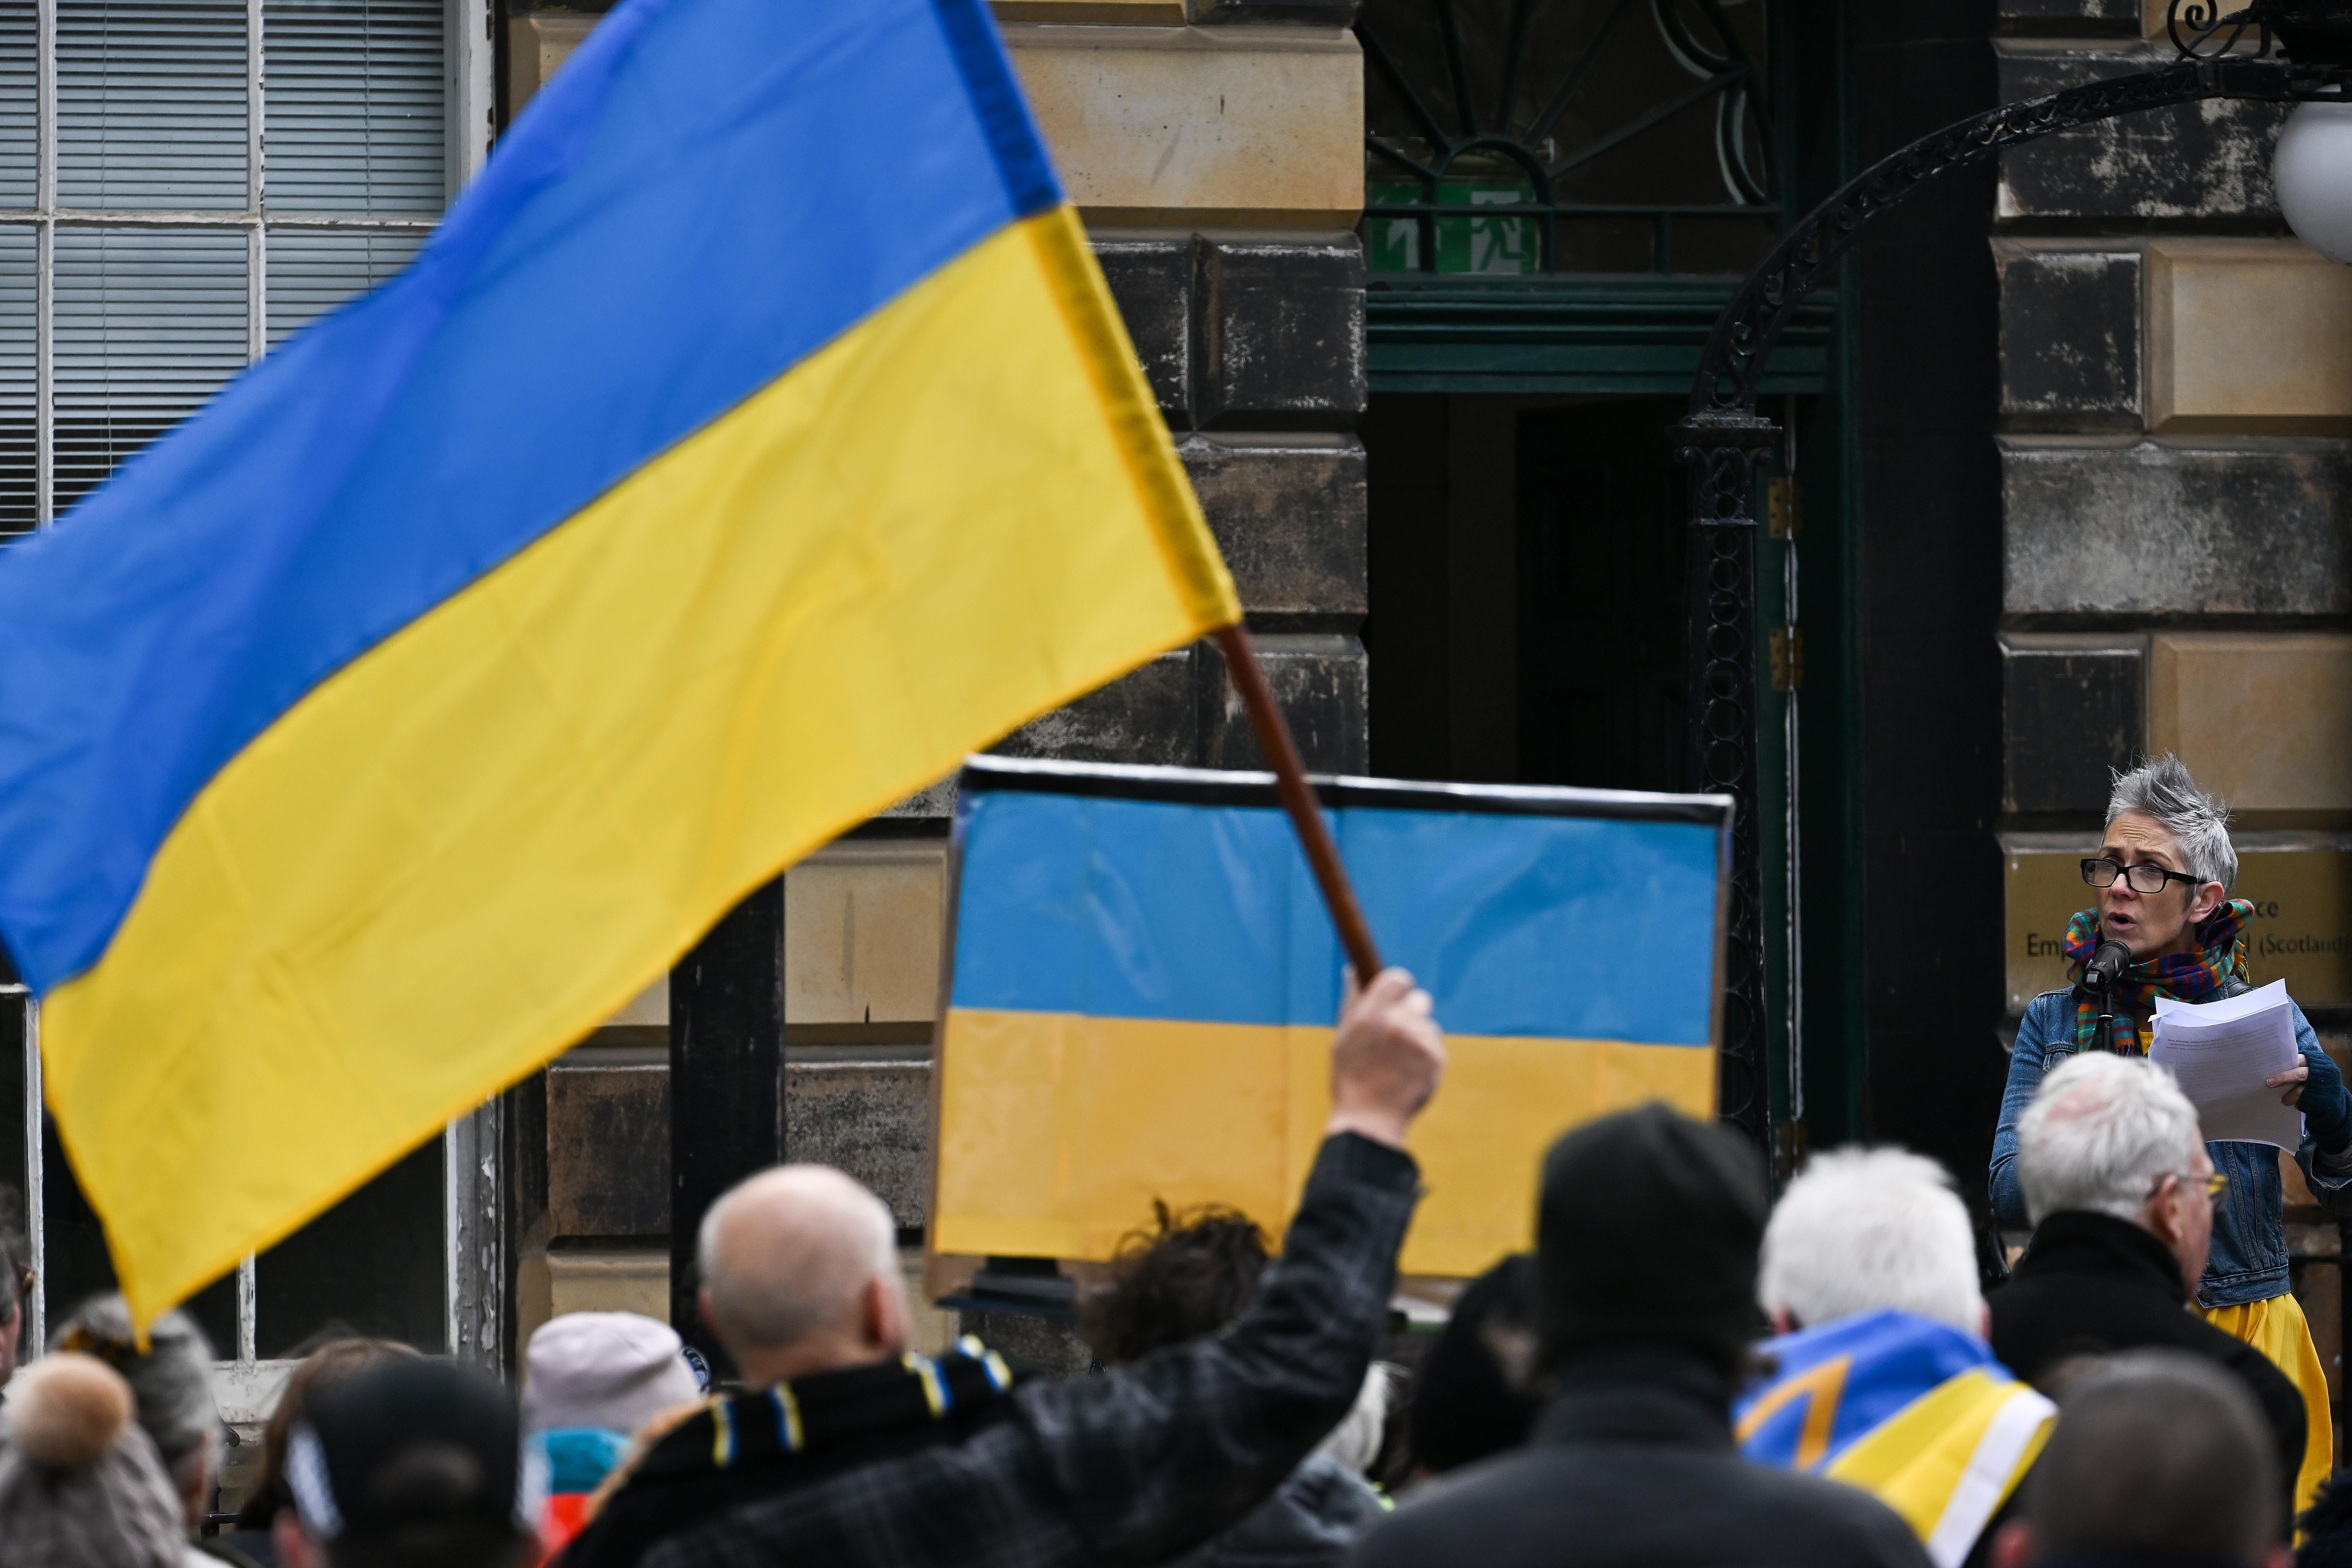 Protesters hold up Ukrainian flags as a woman speaks at the rally